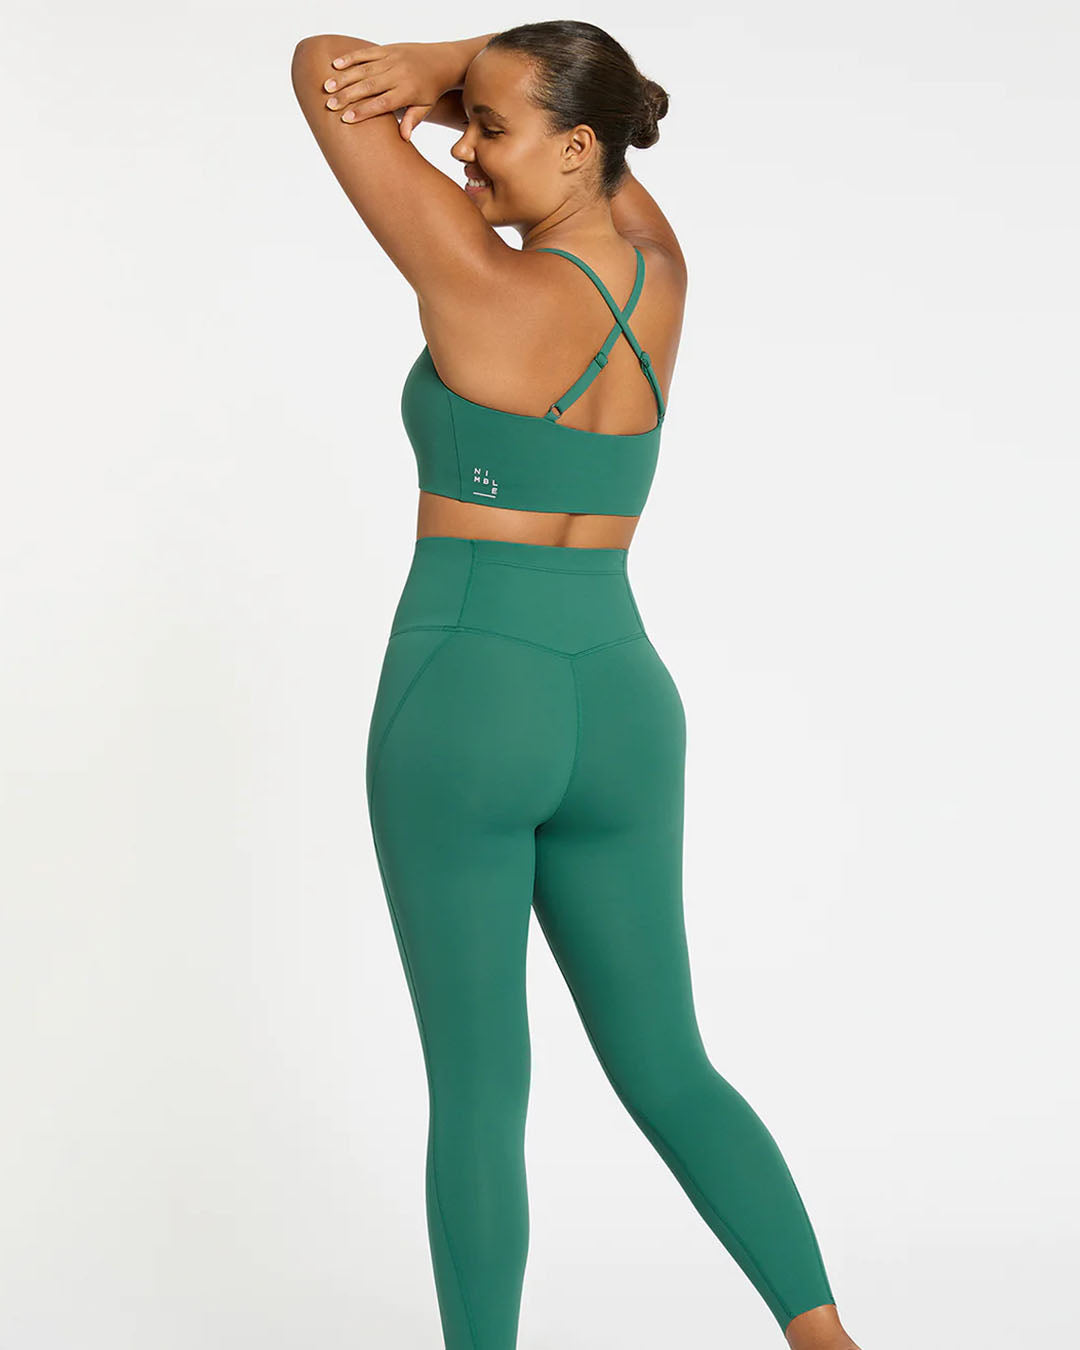 In Motion Adjustable Bra - Emerald Green Sports Bras &amp; Crops by Nimble - Prae Store